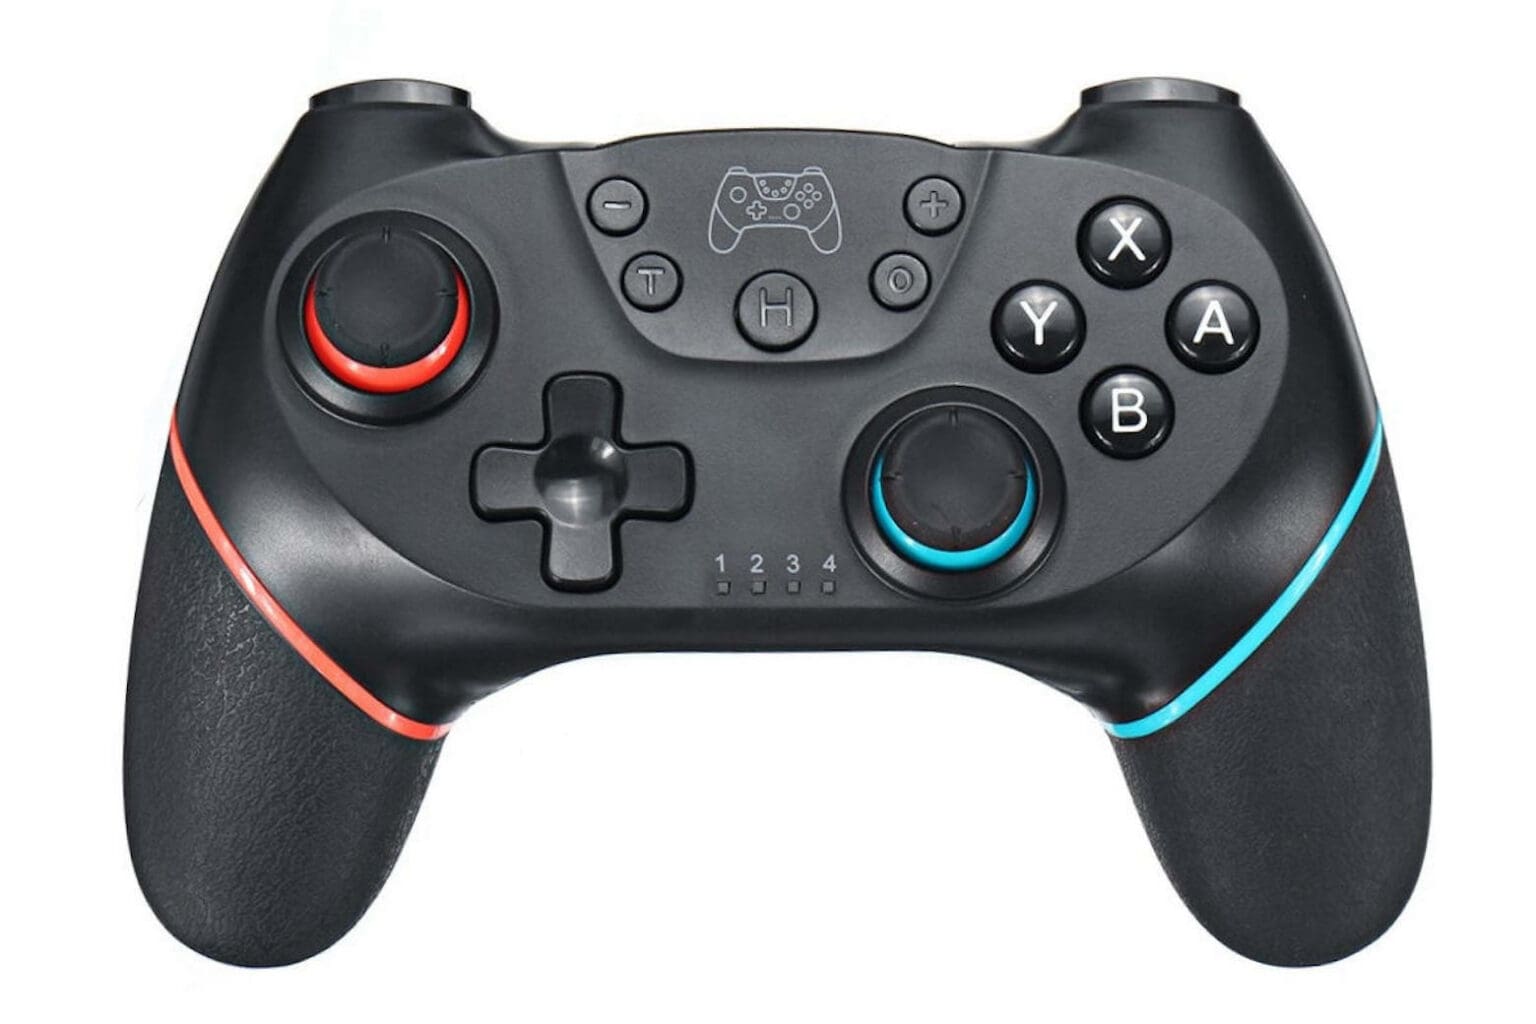 Save on this wireless Nintendo Switch controller.